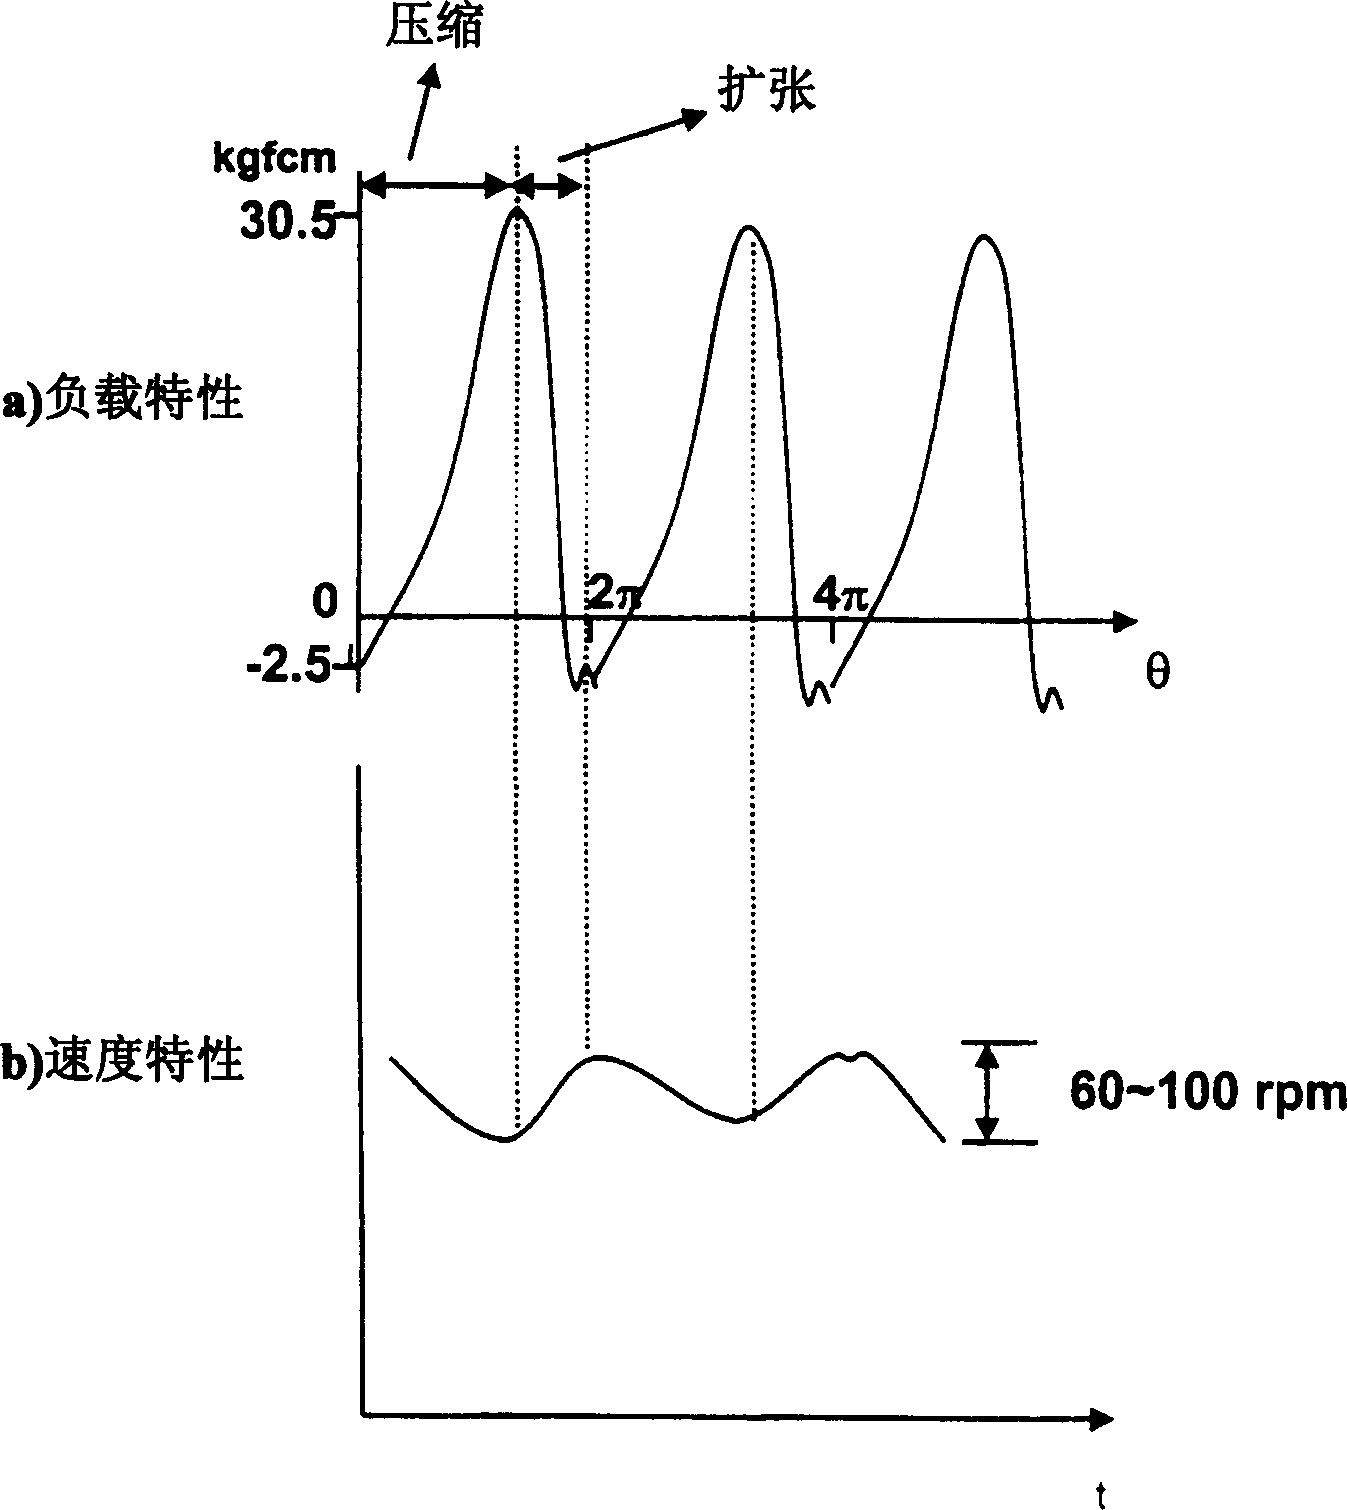 Motor control system and method